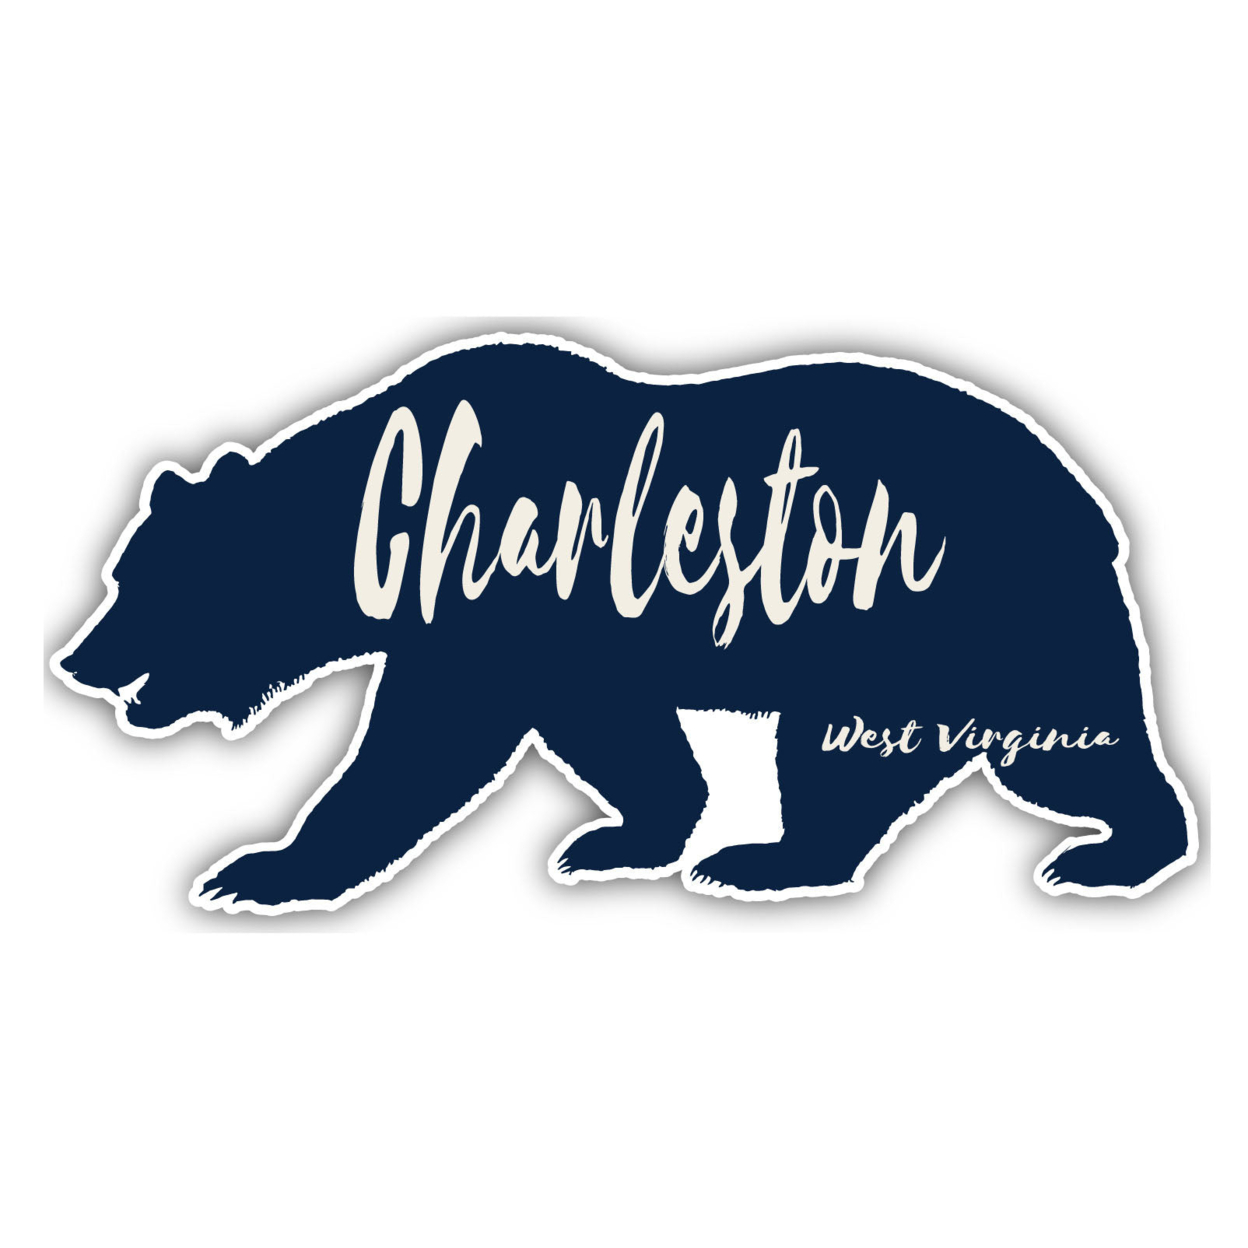 Charleston West Virginia Souvenir Decorative Stickers (Choose Theme And Size) - 4-Pack, 6-Inch, Bear